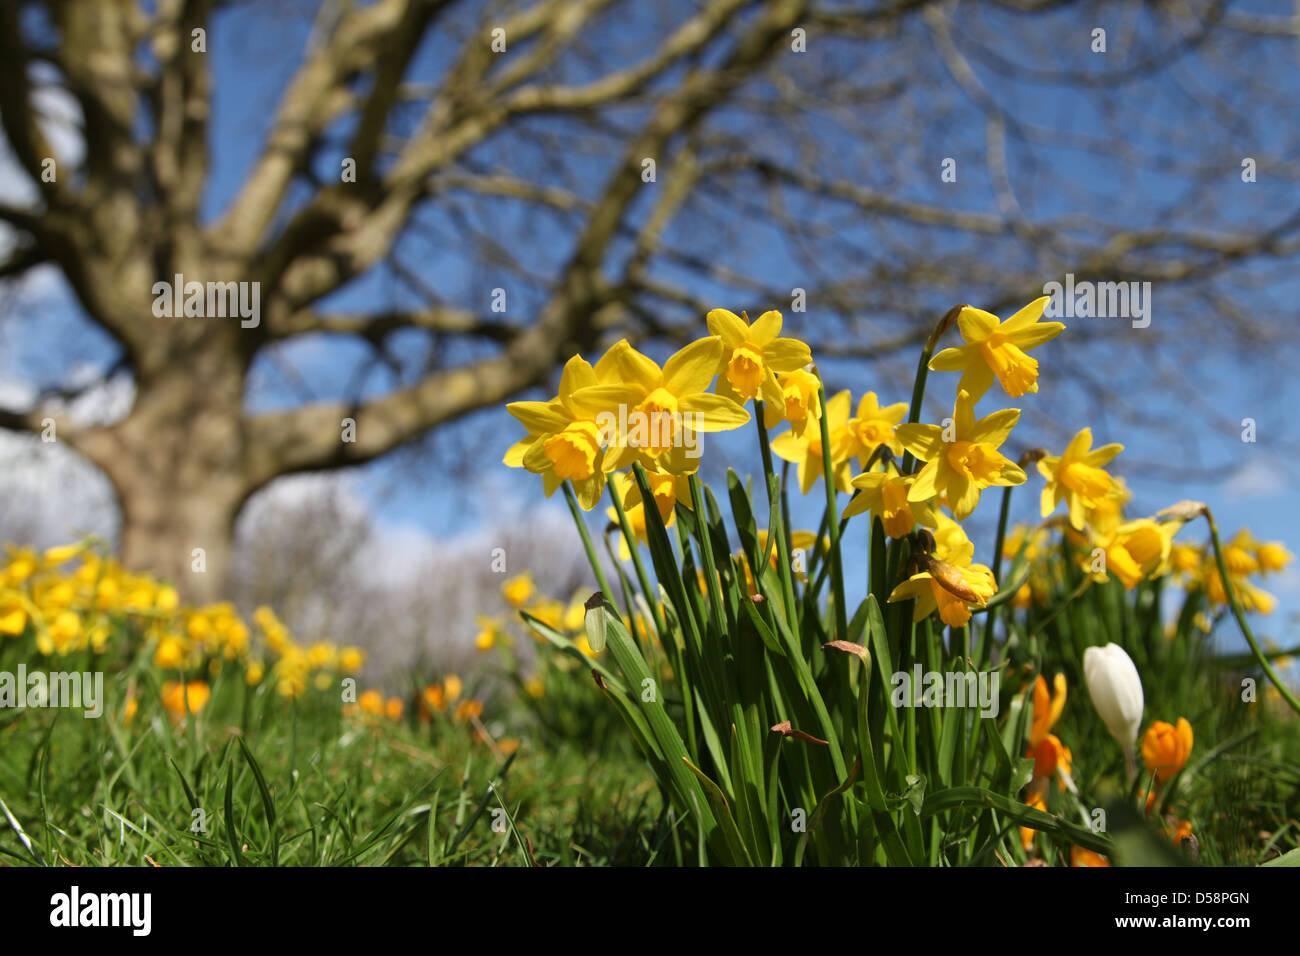 Daffodils growing in Eastrop Park, Basingstoke, Hampshire at the start of Spring 2013. This one of the few sunny days in March. Stock Photo